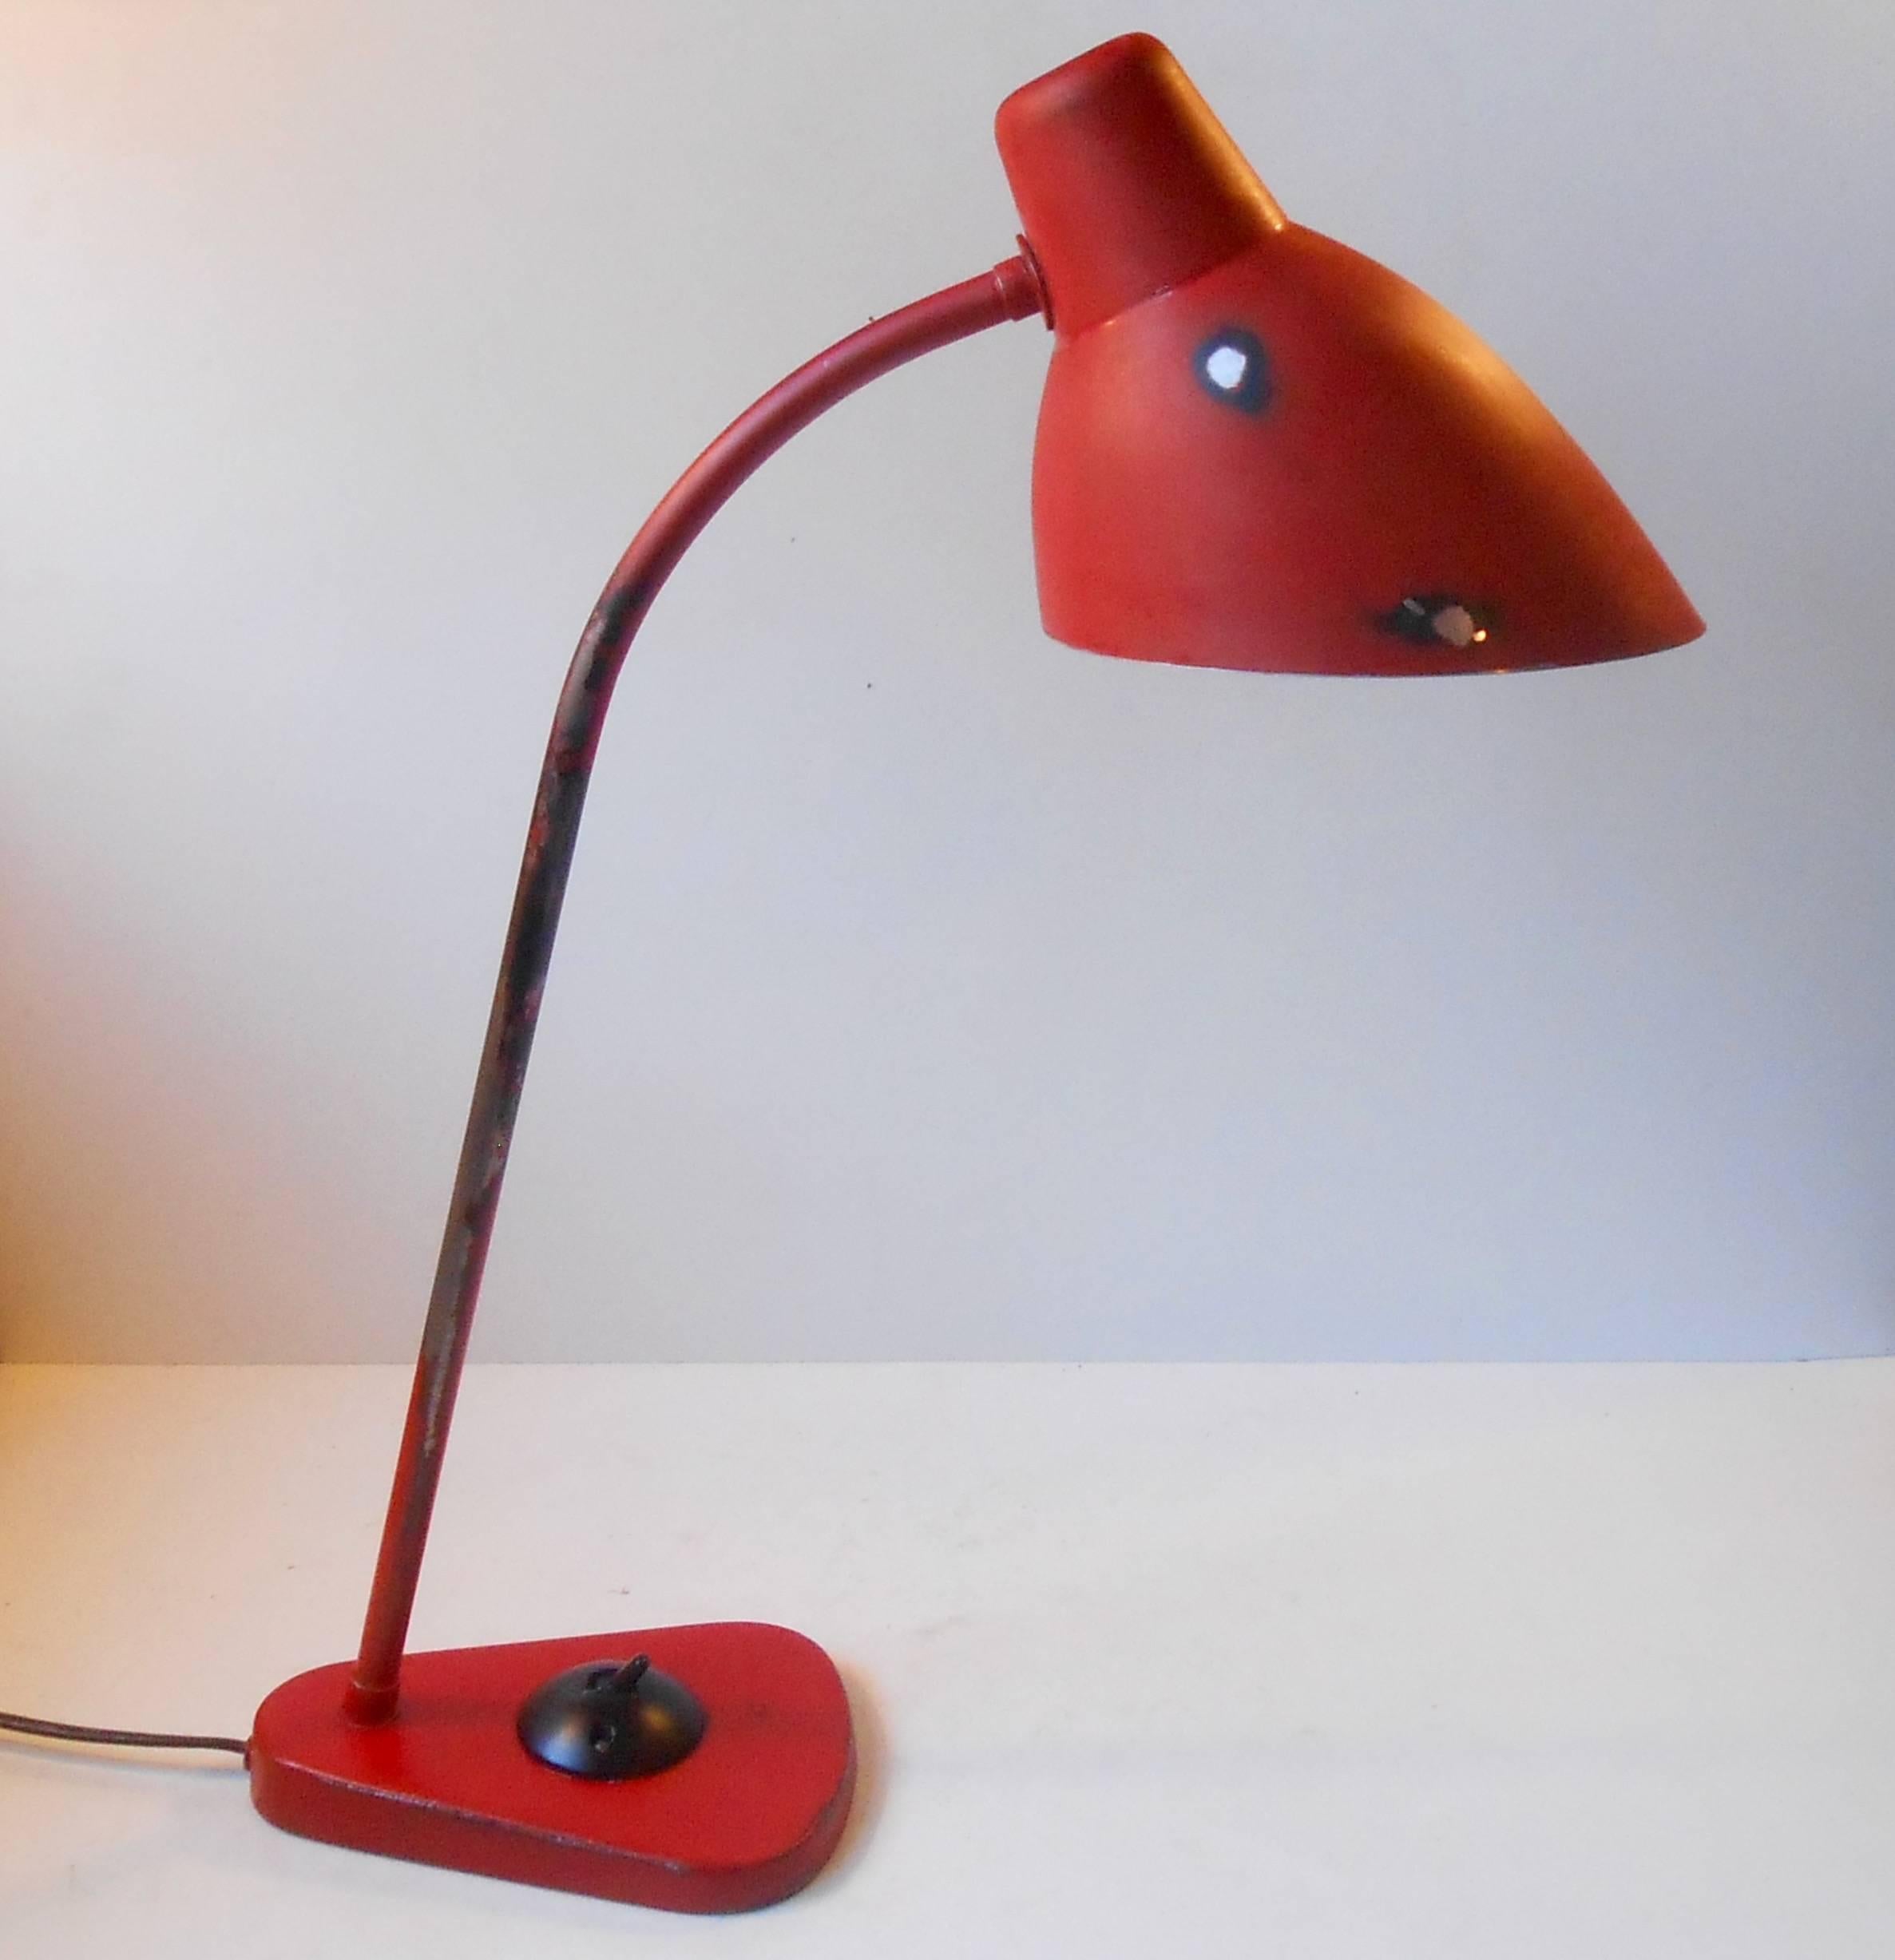 Rare piece designed by Vilhelm Lauritzen in the late 1930s or early 1940s. Made for DSB (De Danske Statsbaner, 'The Danish Railway Network'(trans.) hence the name 'Konduktørlampe' ('Train Conductor' (trans). Its was manufactured by Louis Poulsen.